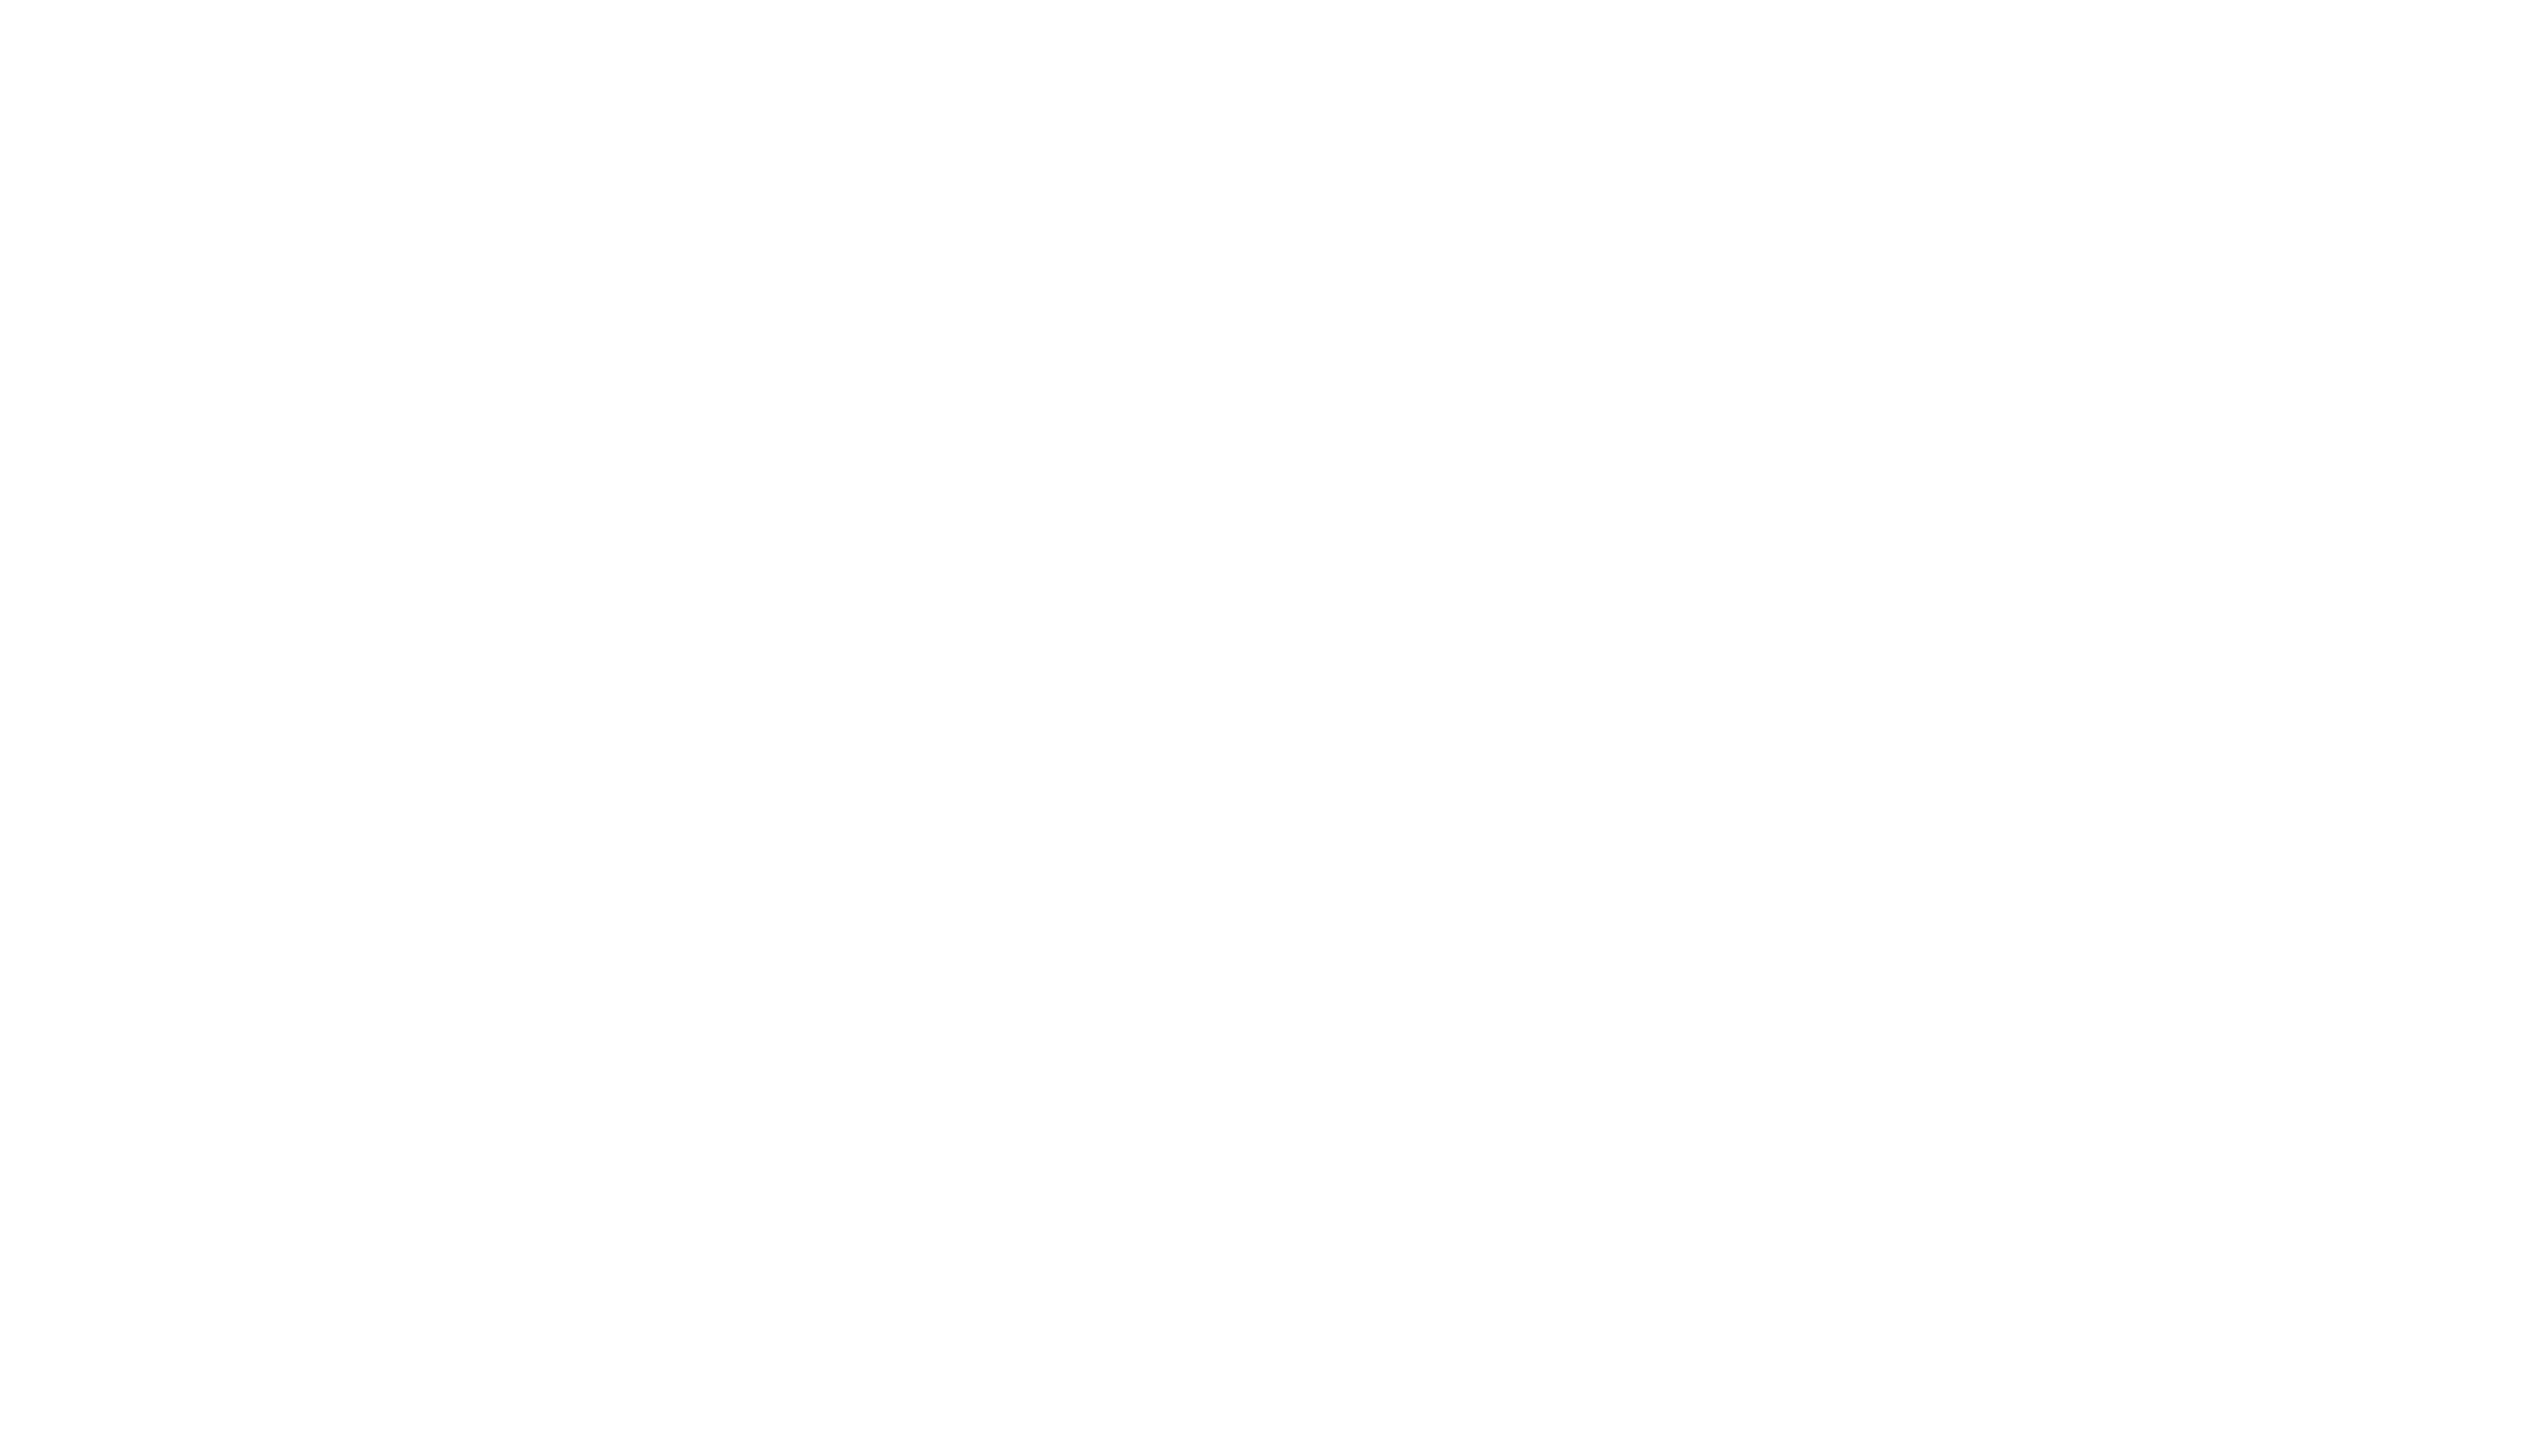 Idiart Law Group - Personal Injury and Immigration Attorneys